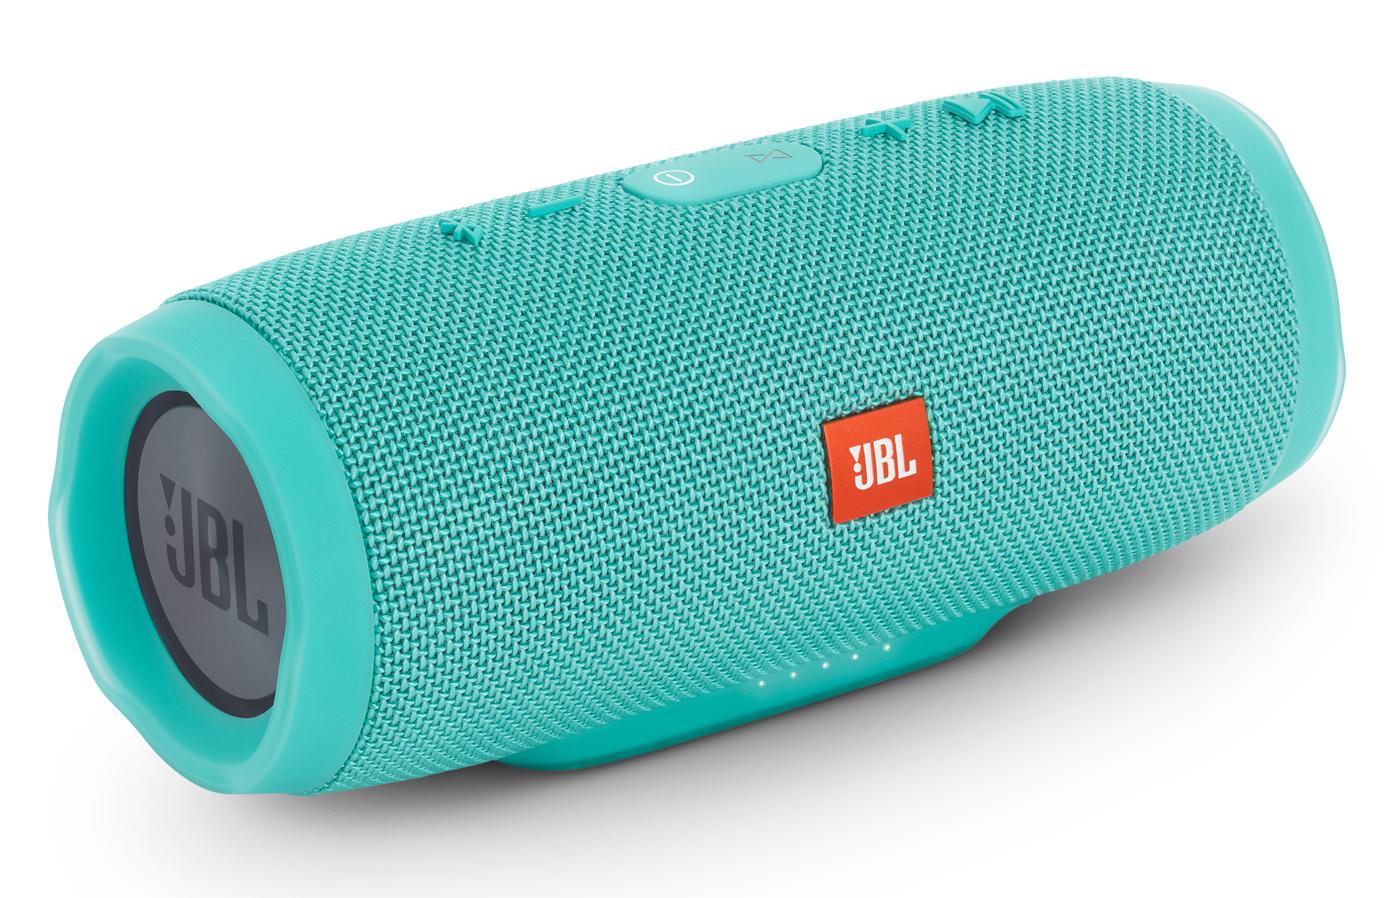 JBL Charge 3 Bluetooth speaker on sale for $90 ($60 off) at multiple